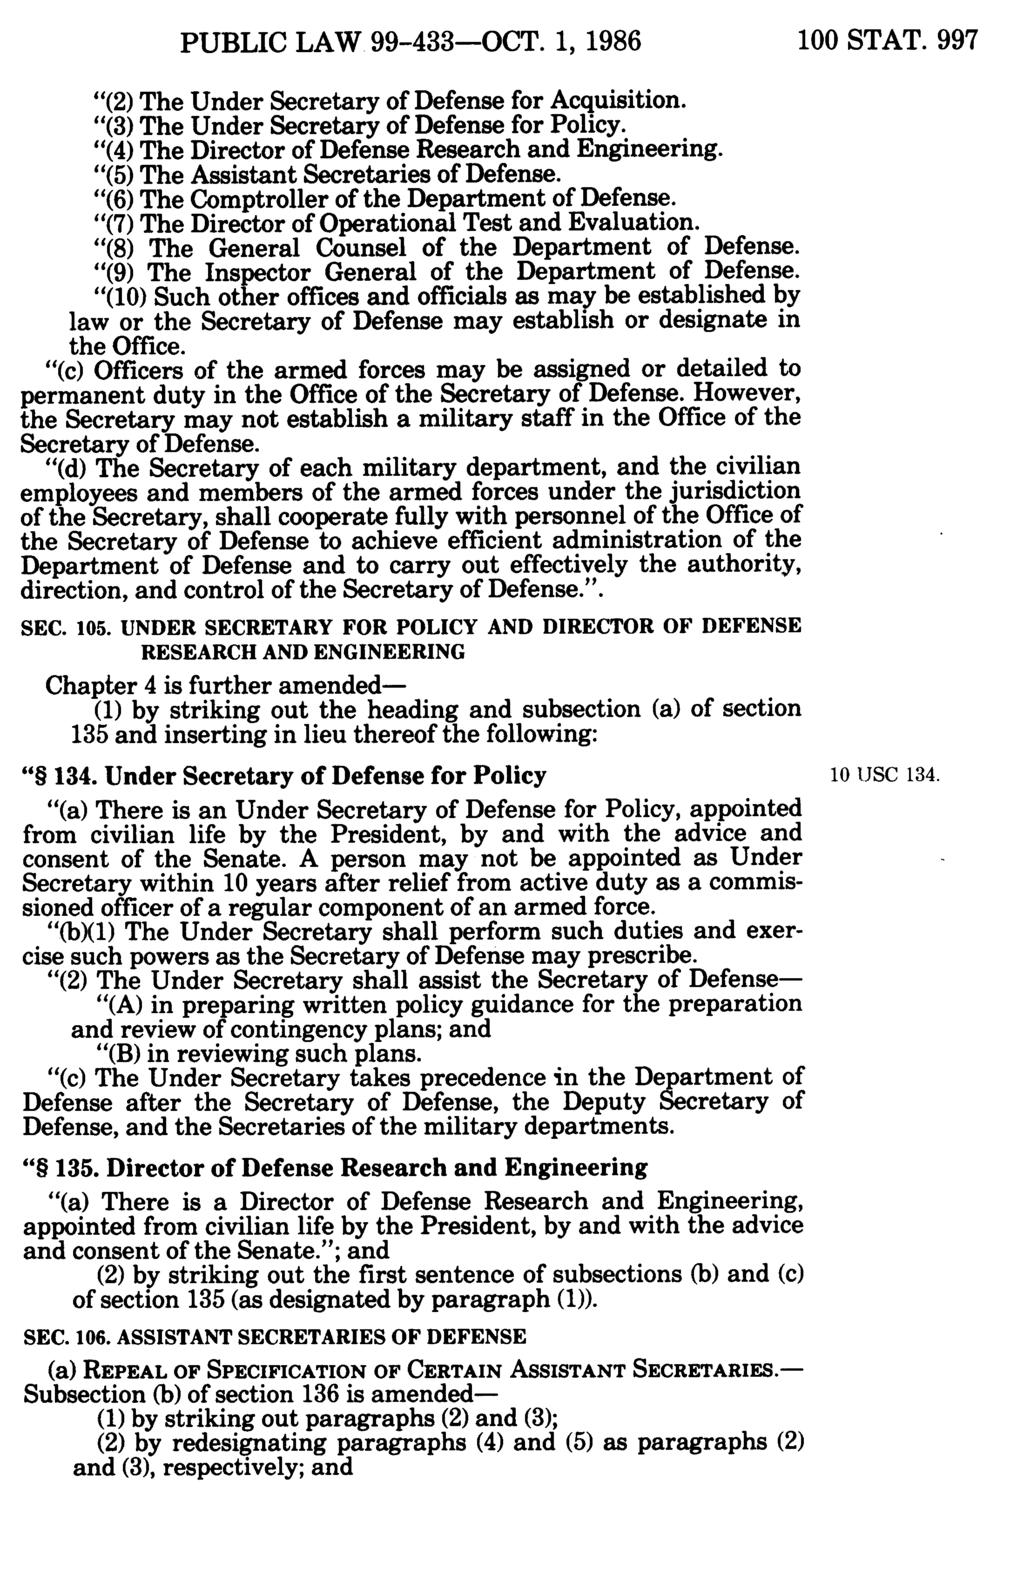 PUBLIC LAW 99-433-OCT. 1, 1986 100 STAT. 997 (2) The Under Secretary of Defense for Acquisition. (3) The Under Secretary of Defense for Policy. (4) The Director of Defense Research and Engineering.